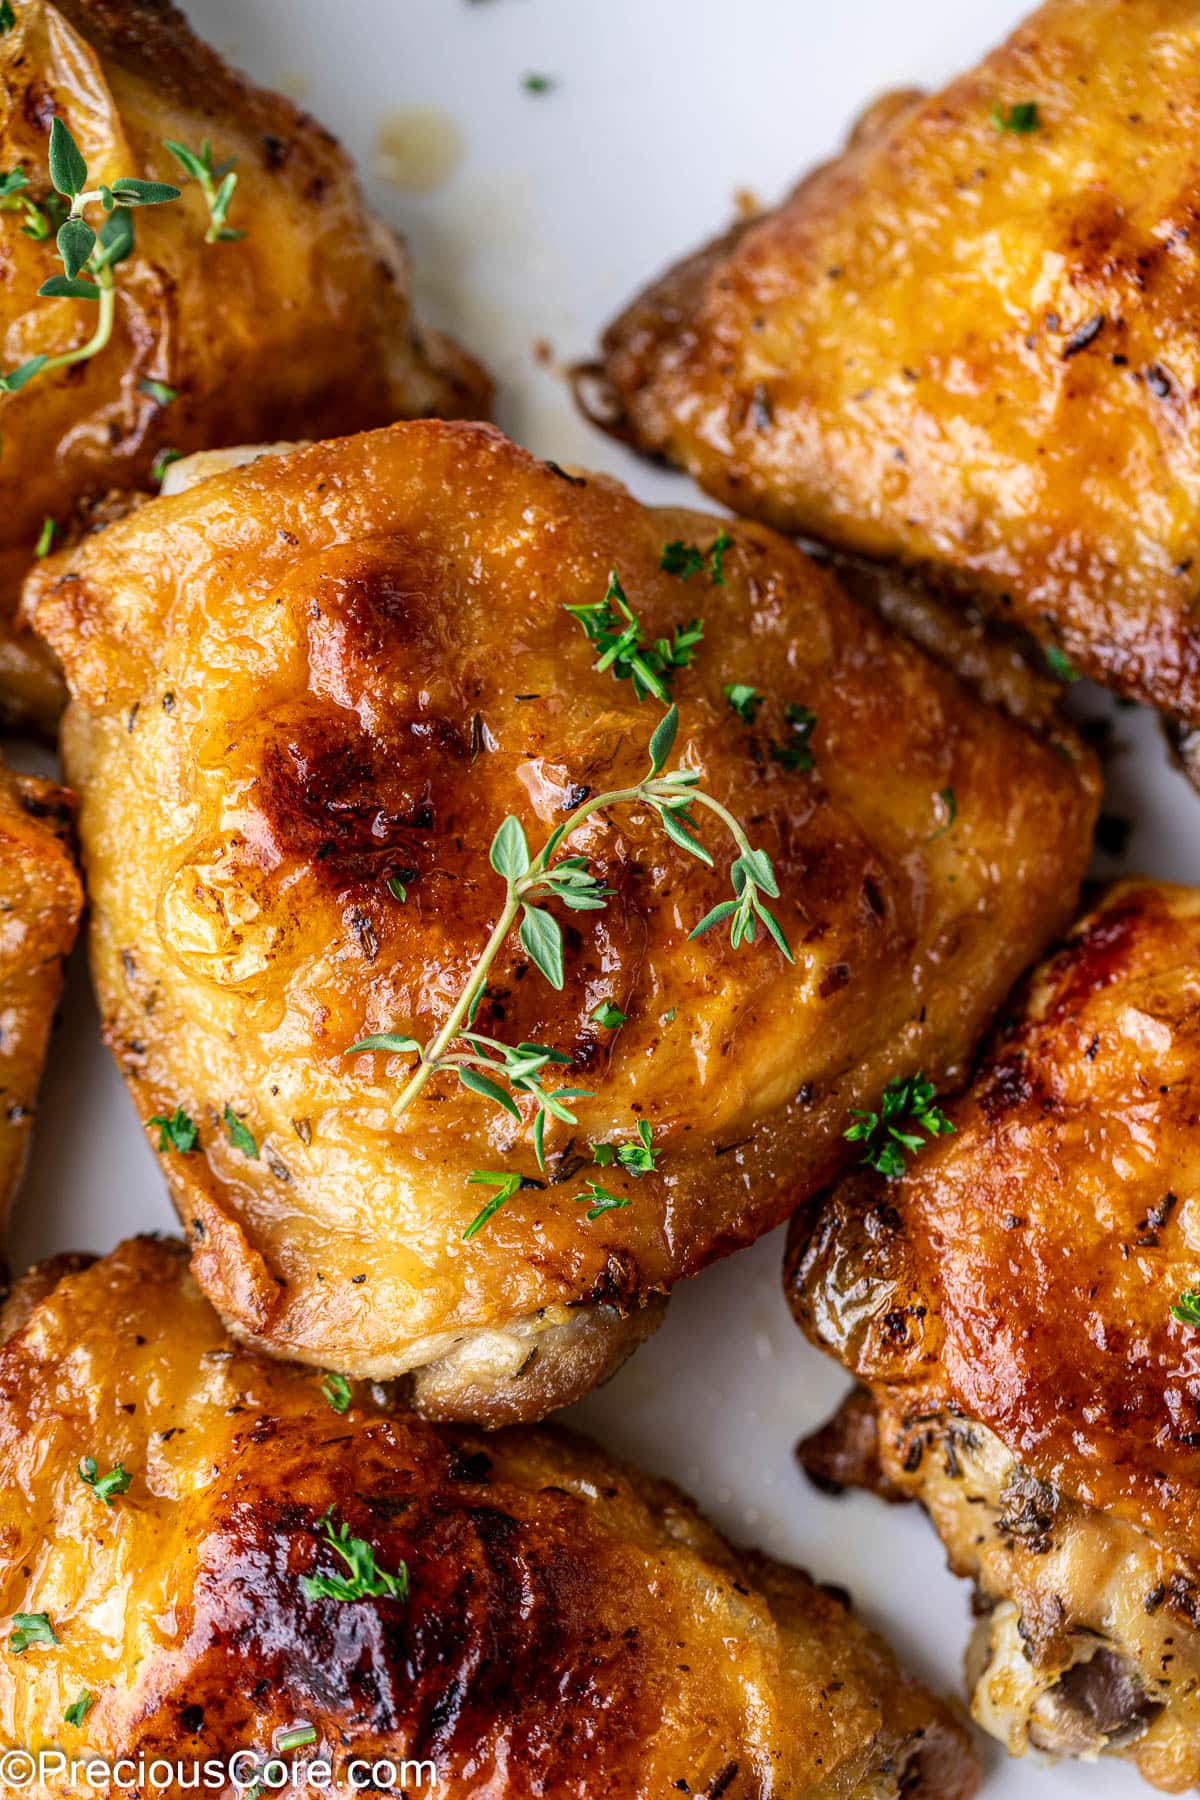 Close up on a golden brown chicken thigh, surrounded by other chicken thighs.